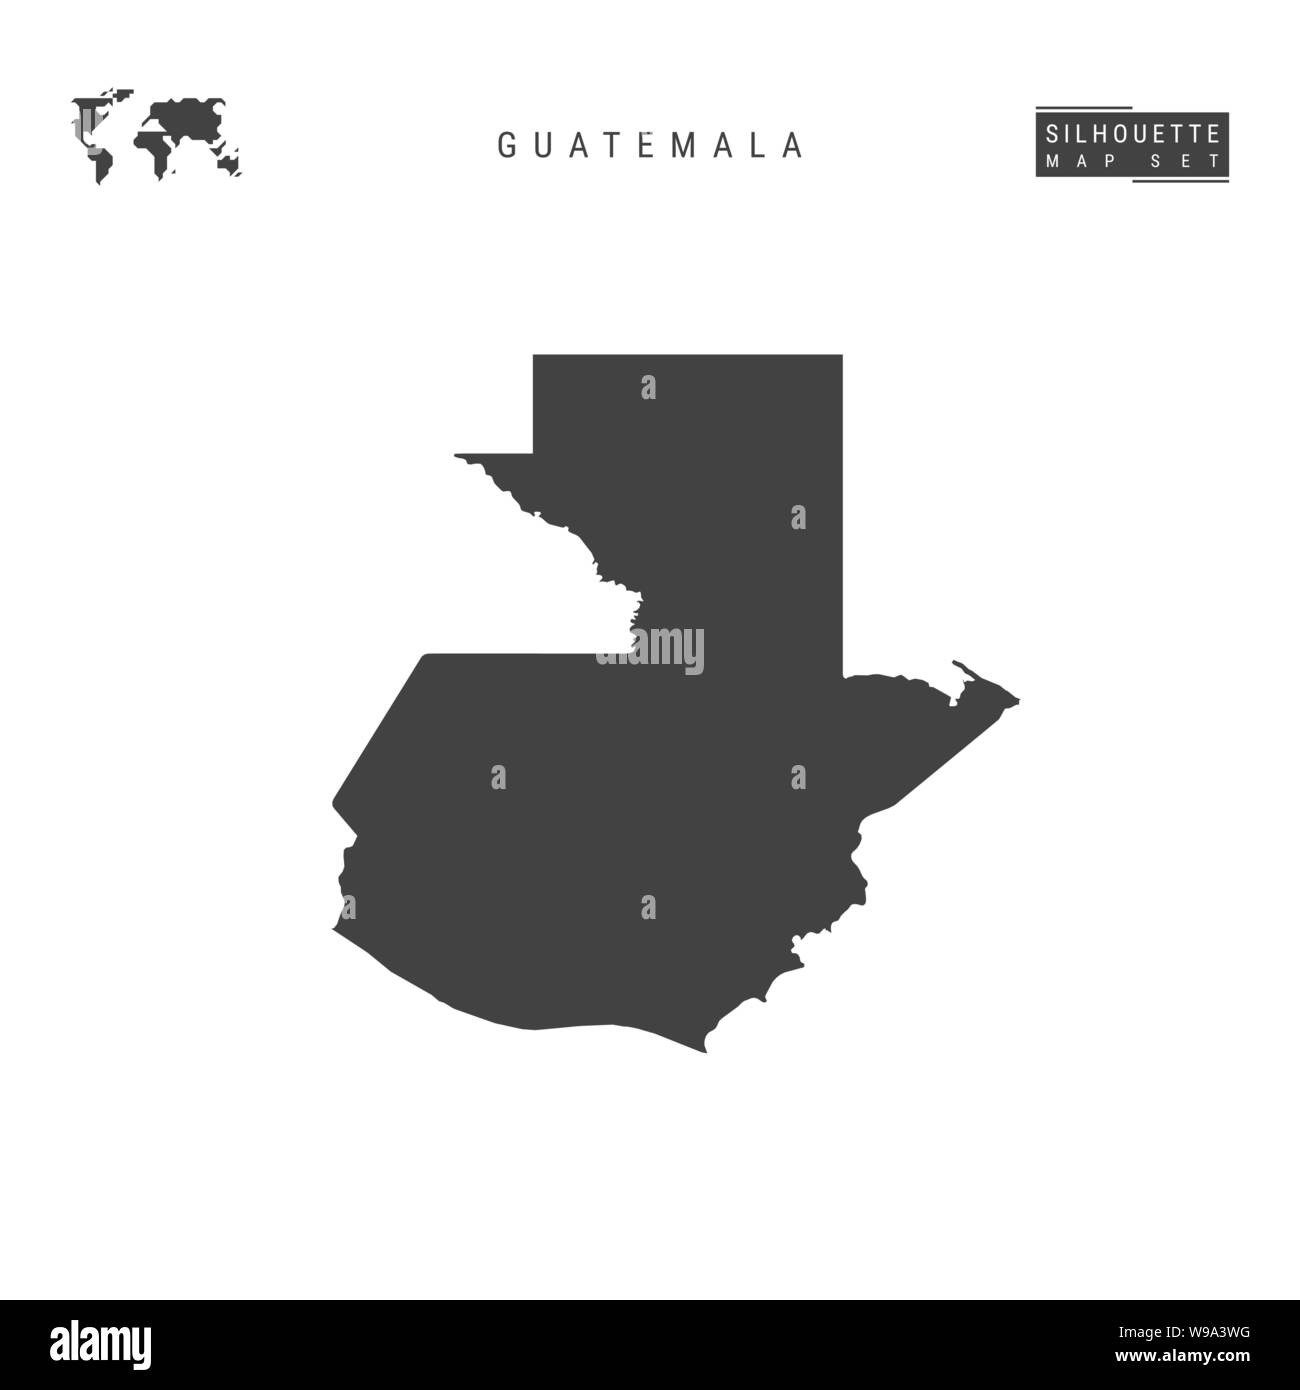 Guatemala Blank Vector Map Isolated on White Background. High-Detailed Black Silhouette Map of Guatemala. Stock Vector